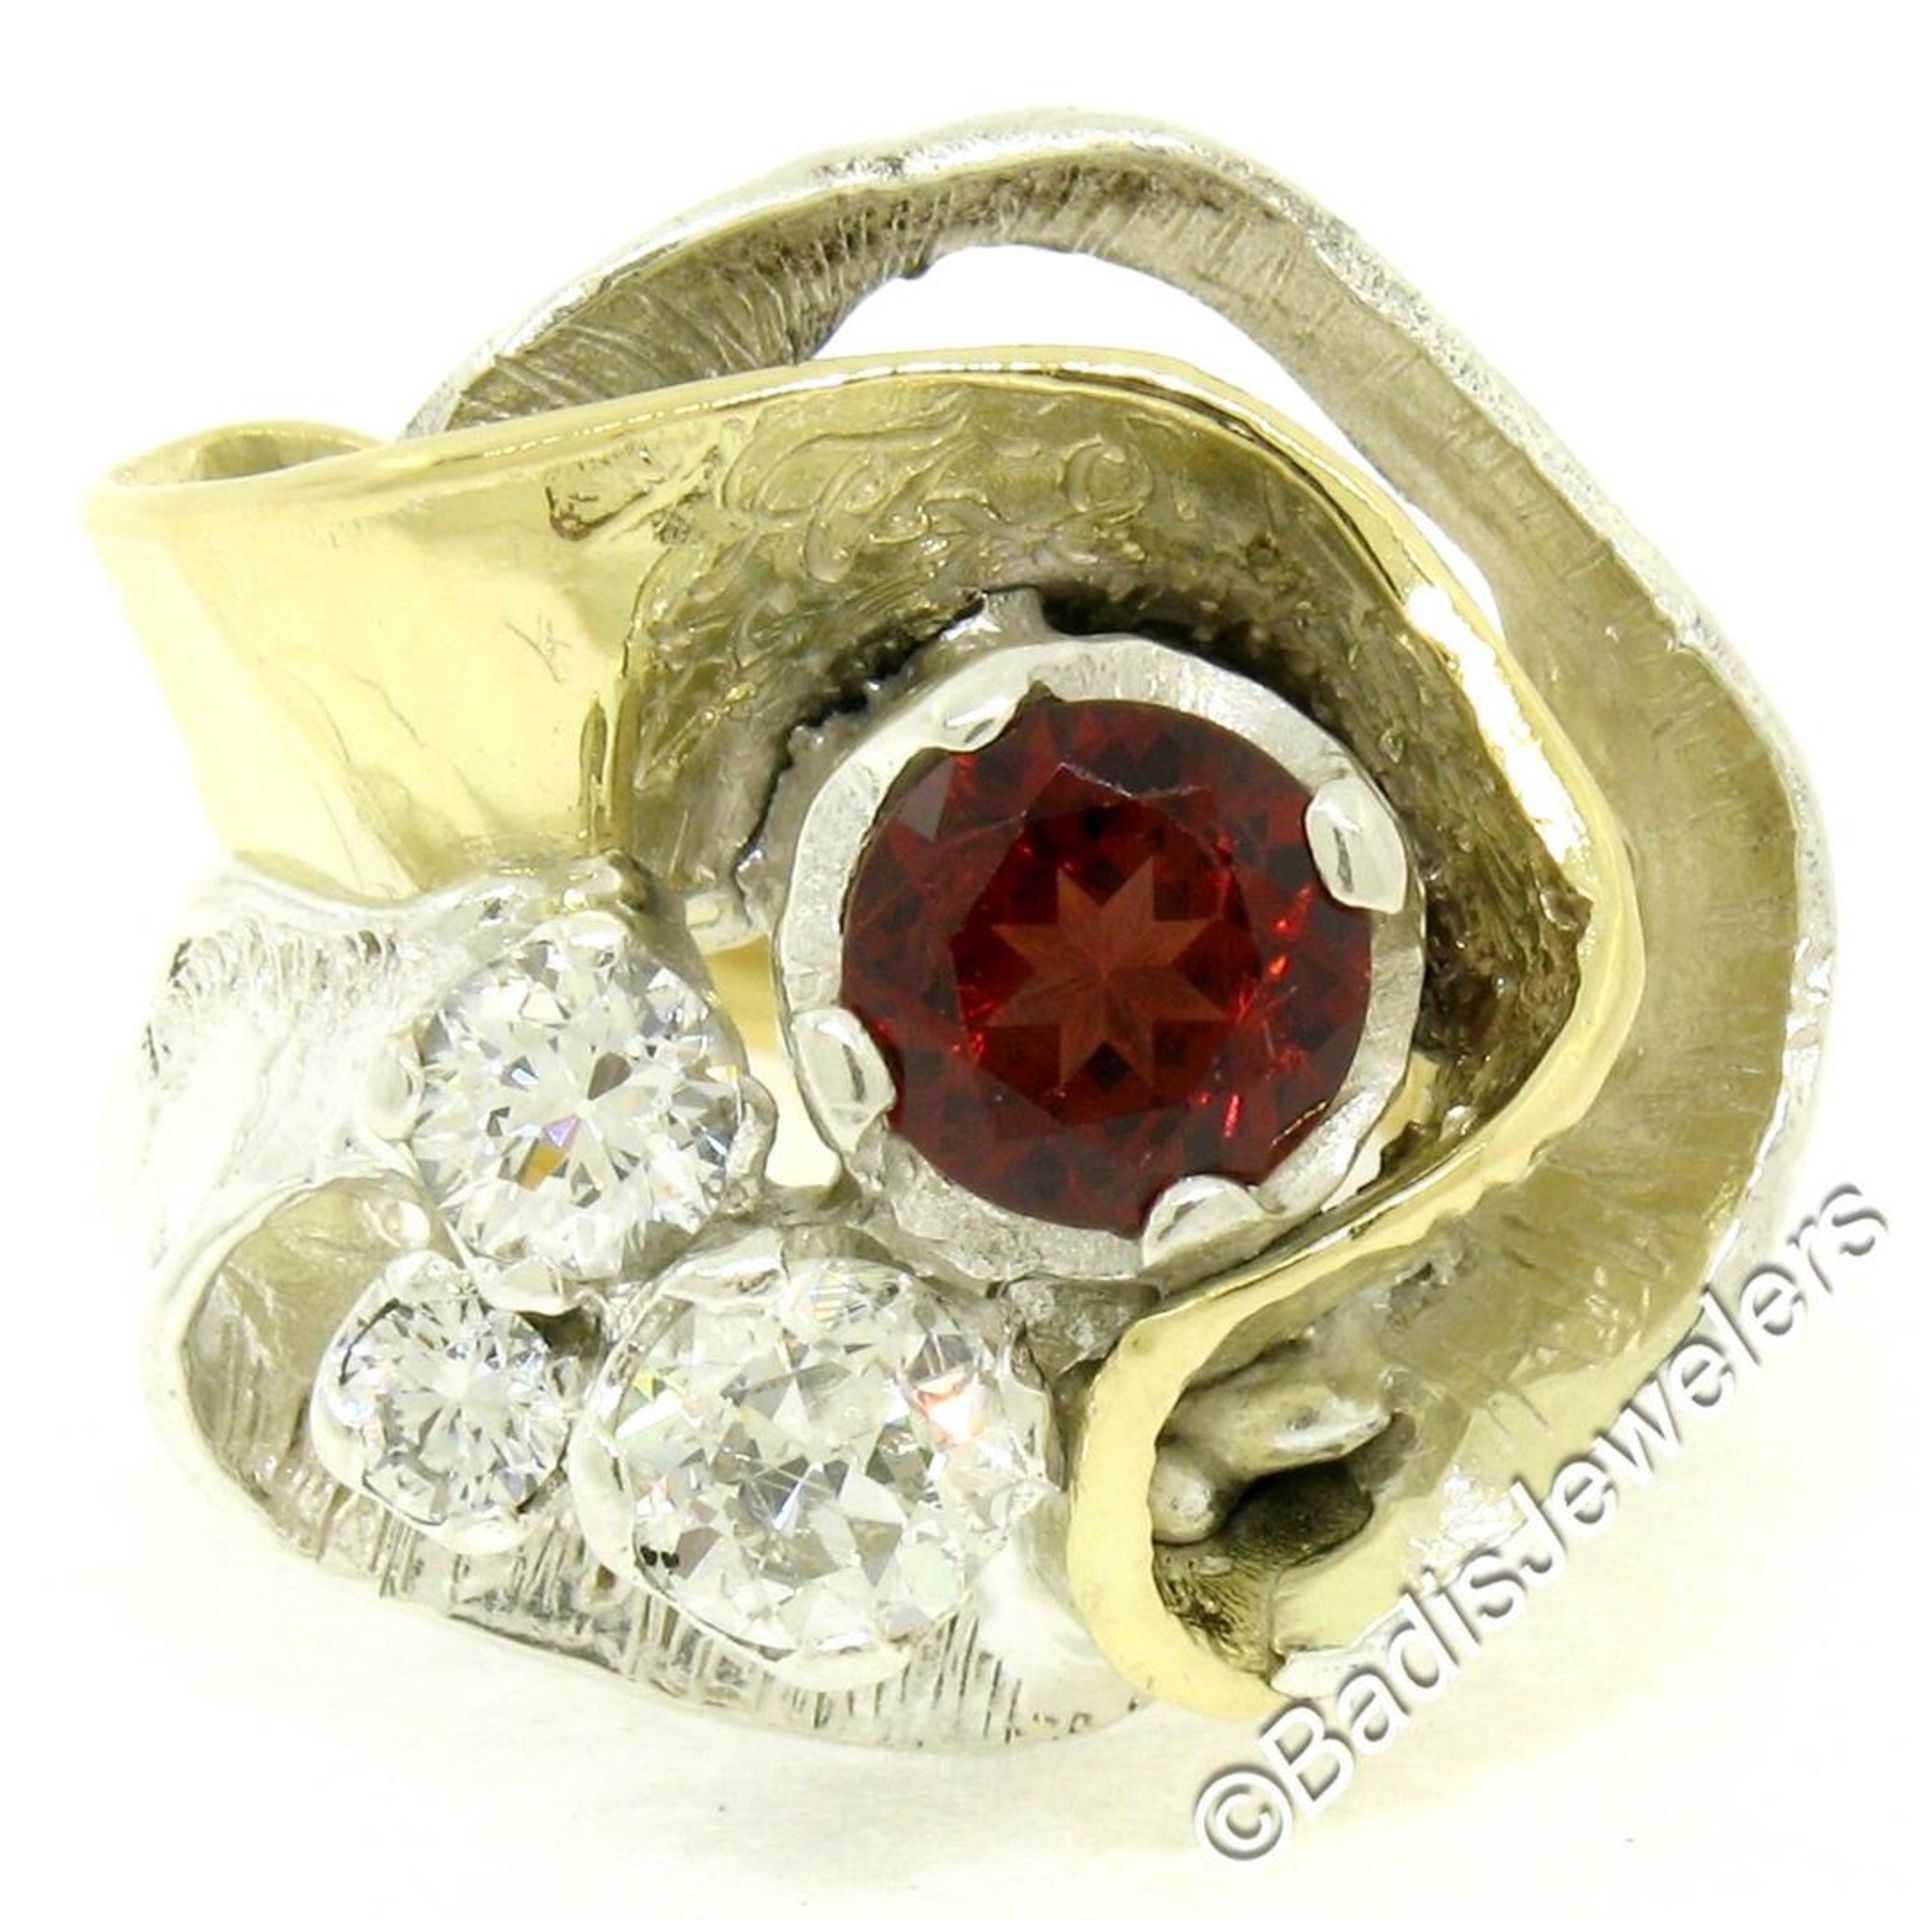 18kt Yellow Gold and Sterling Silver 2.73ctw Garnet and Diamond Cocktail Ring - Image 3 of 9